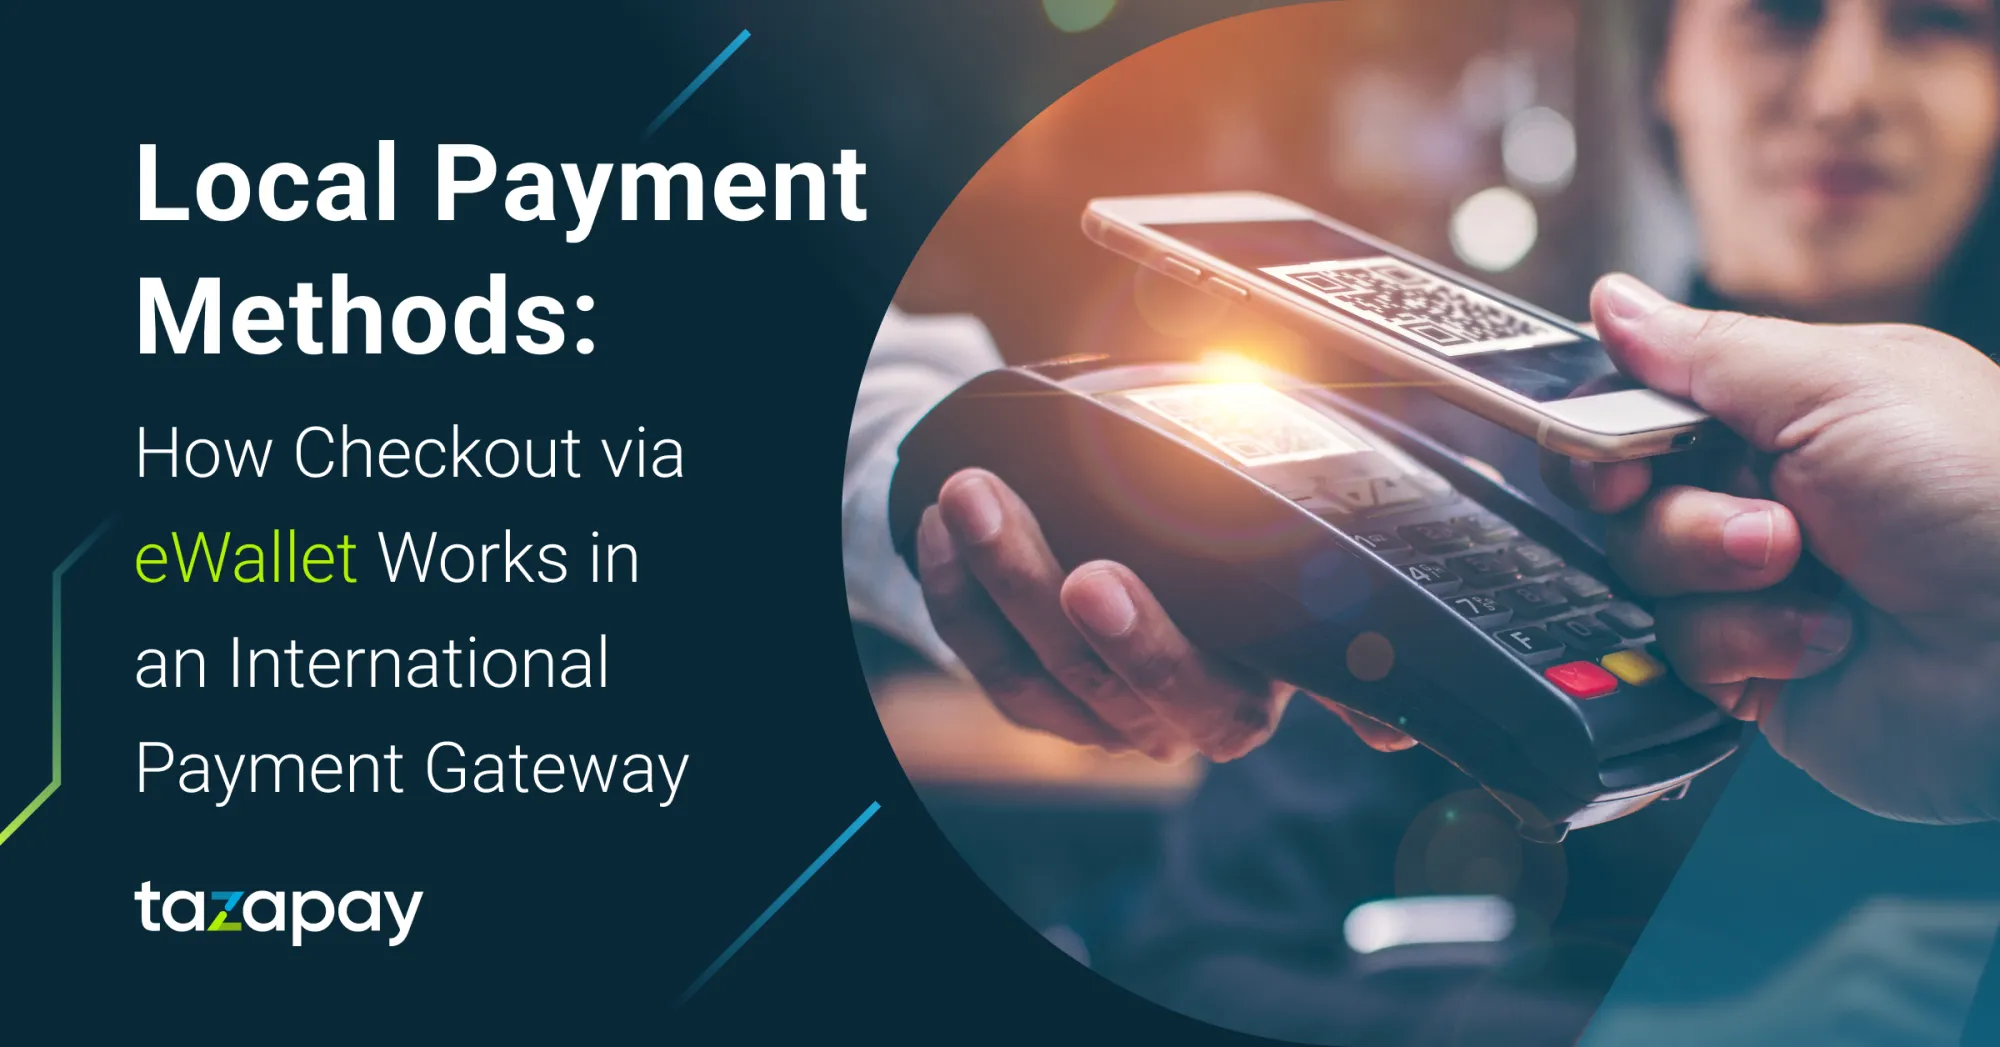 Local Payment Methods: How Checkout via eWallets Work in an International Payment Gateway